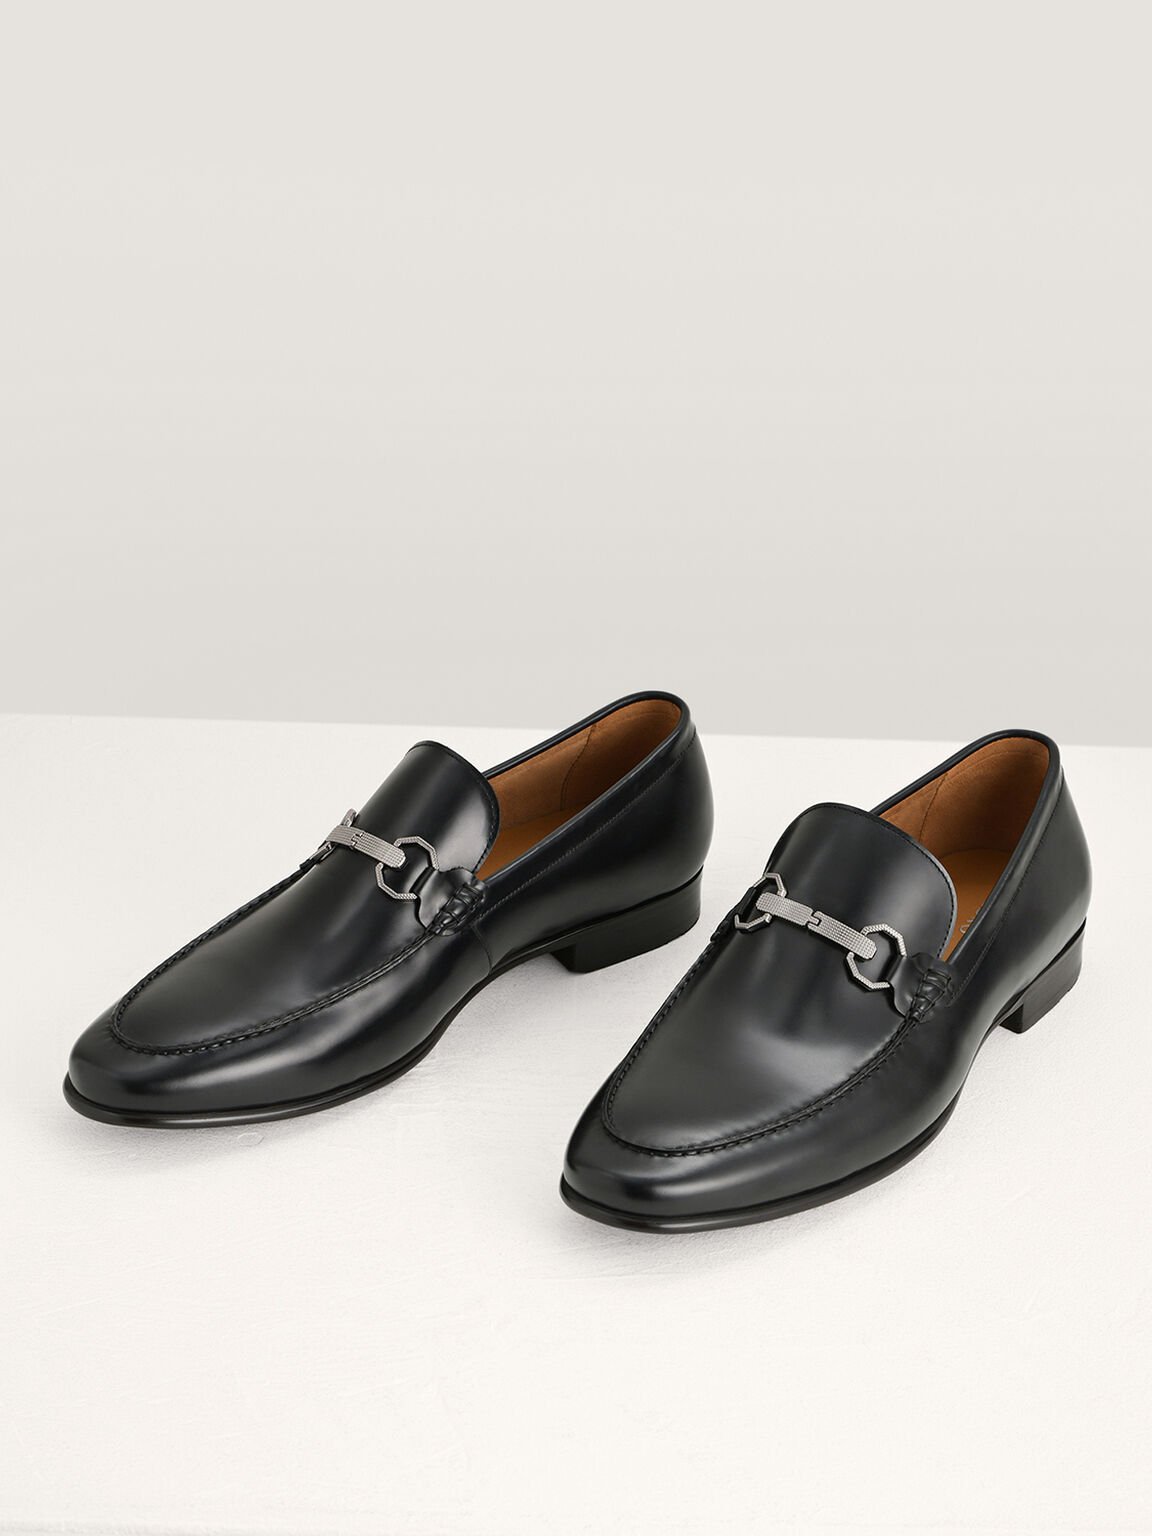 Buckle Leather Loafers, Black